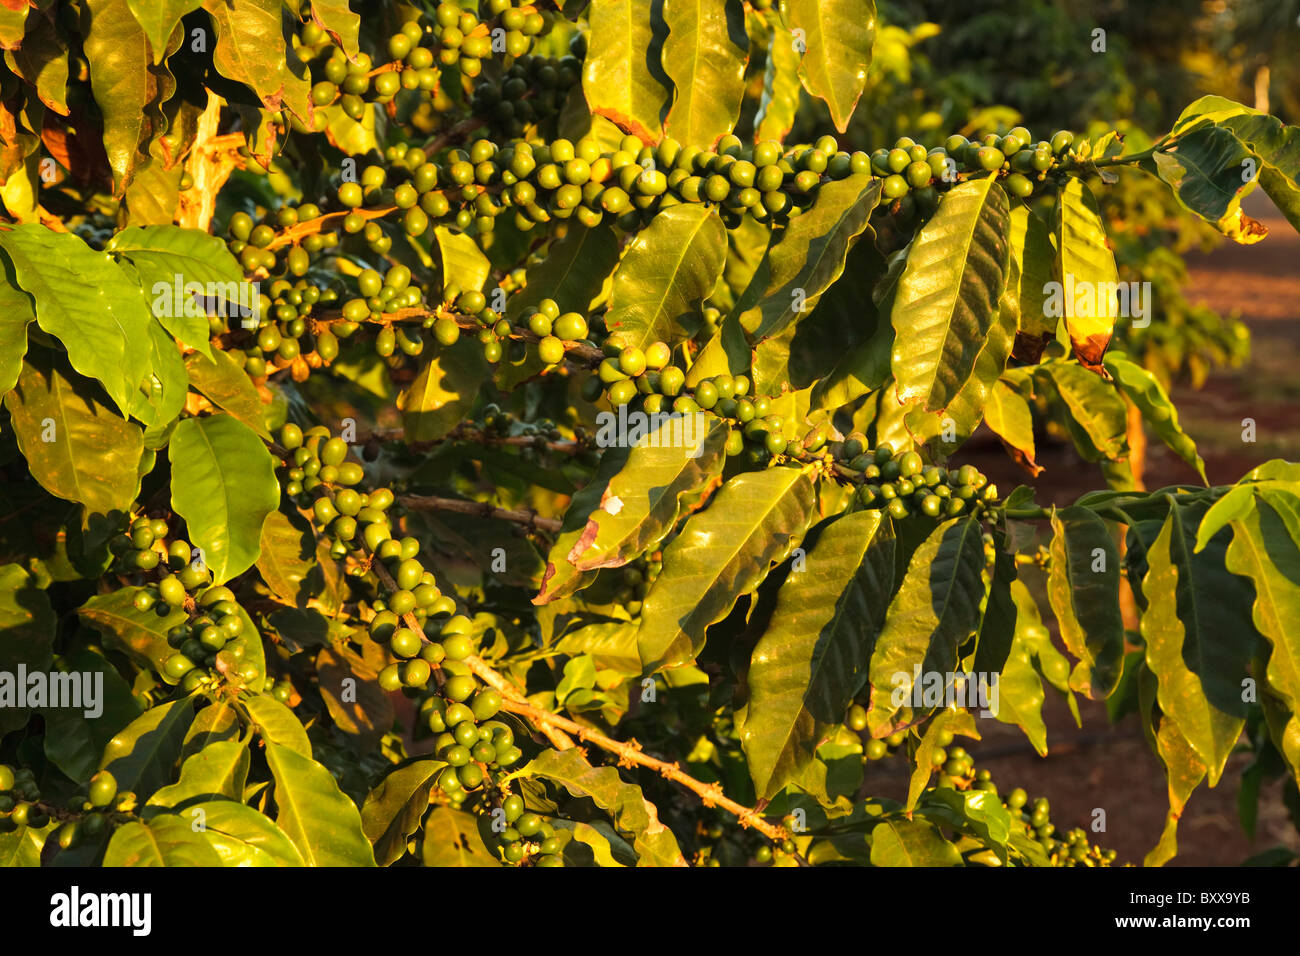 Coffee plant at sunset Stock Photo